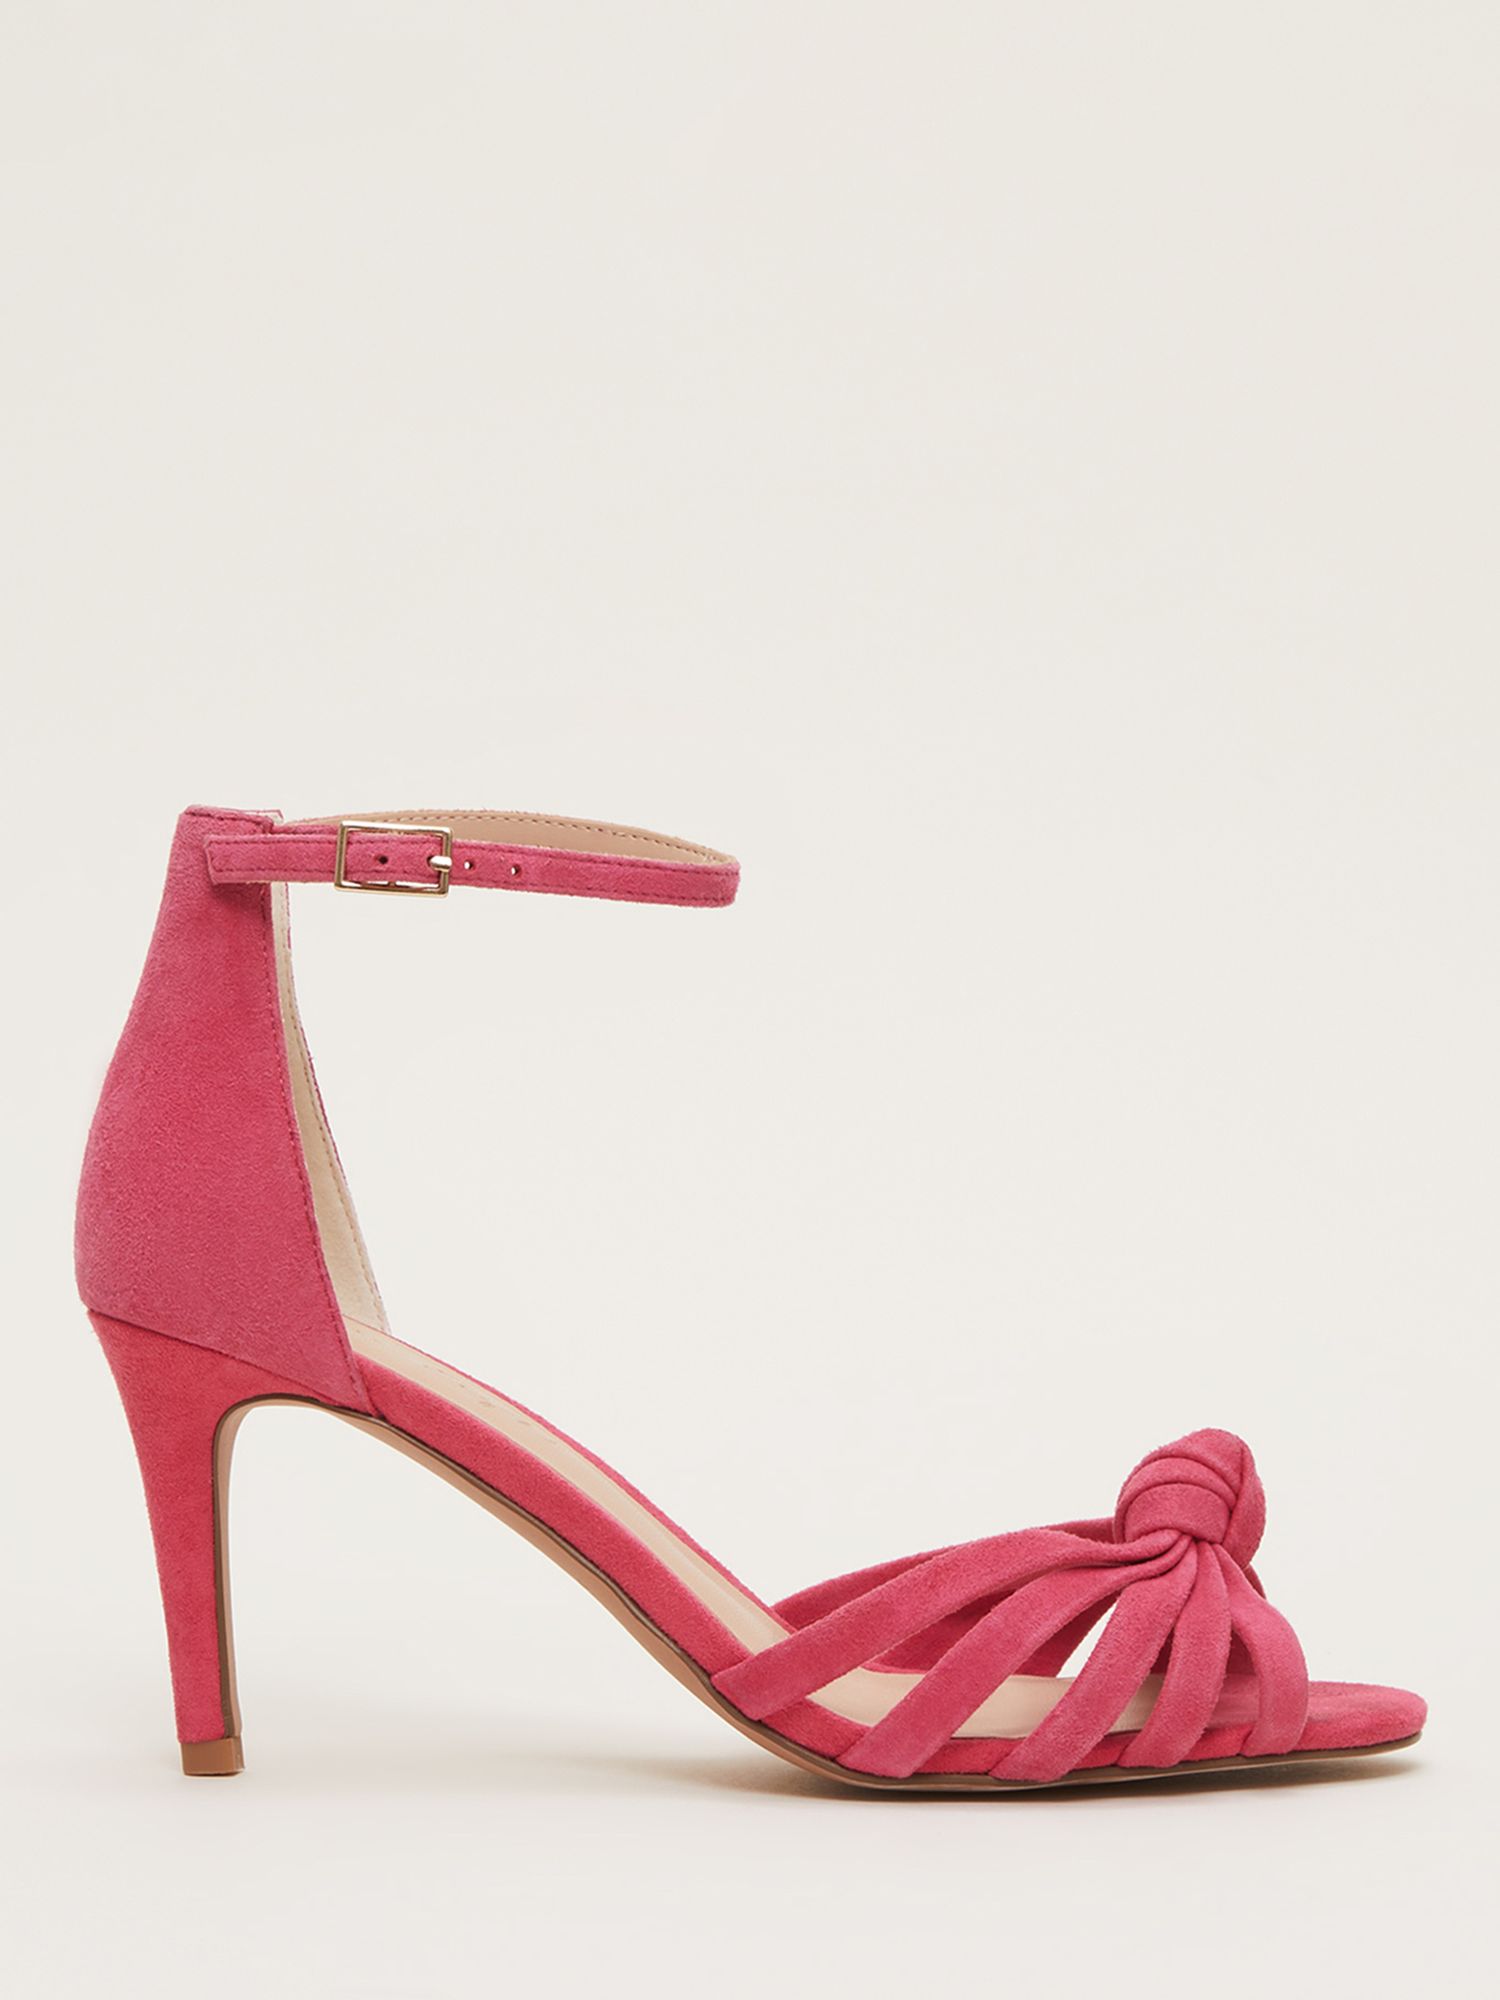 Phase Eight Suede Knot Front Heeled Sandals, Raspberry at John Lewis ...